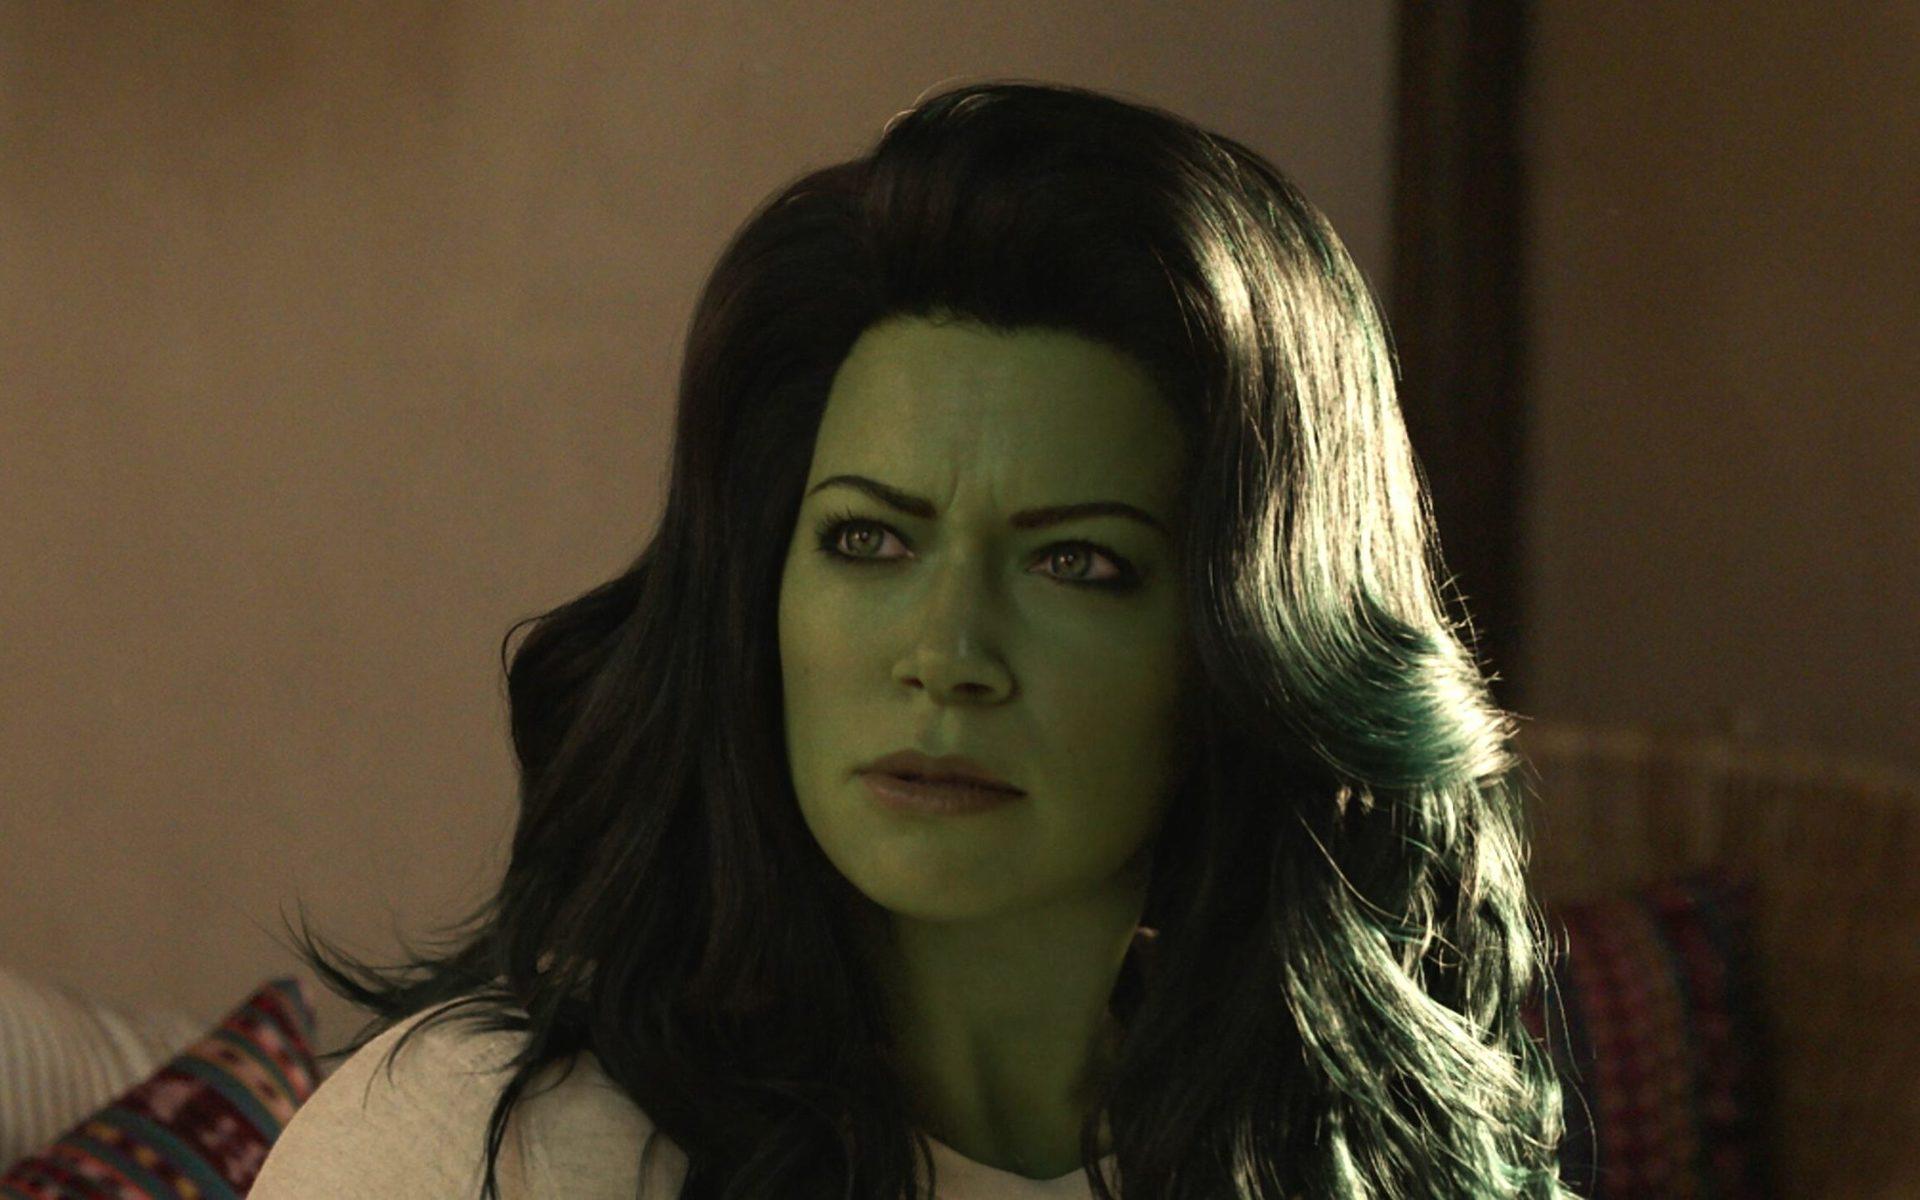 ”She-Hulk: Attorney at law”.